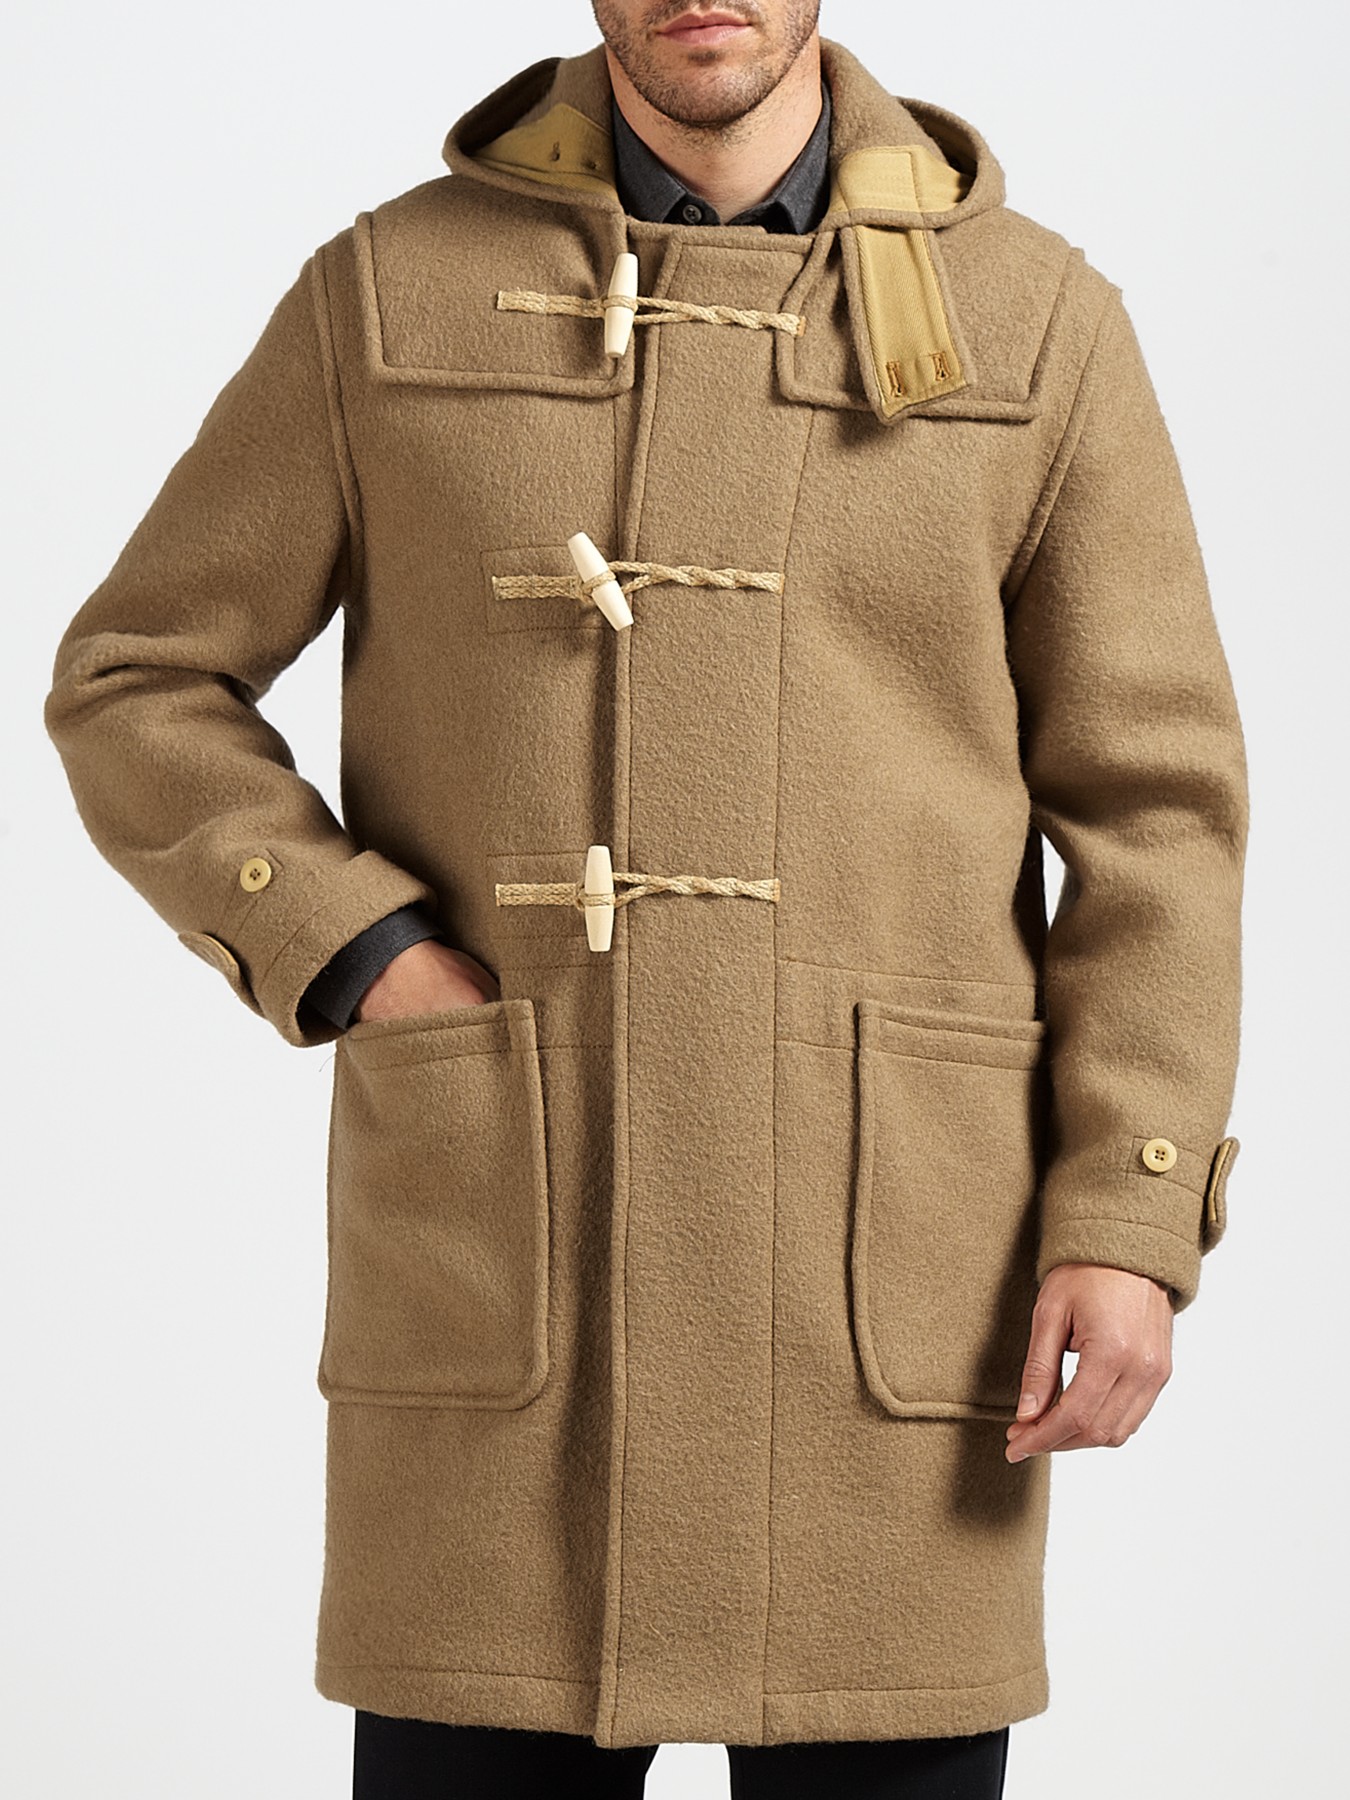 Gloverall Monty Wool Duffel Coat in Natural for Men - Lyst